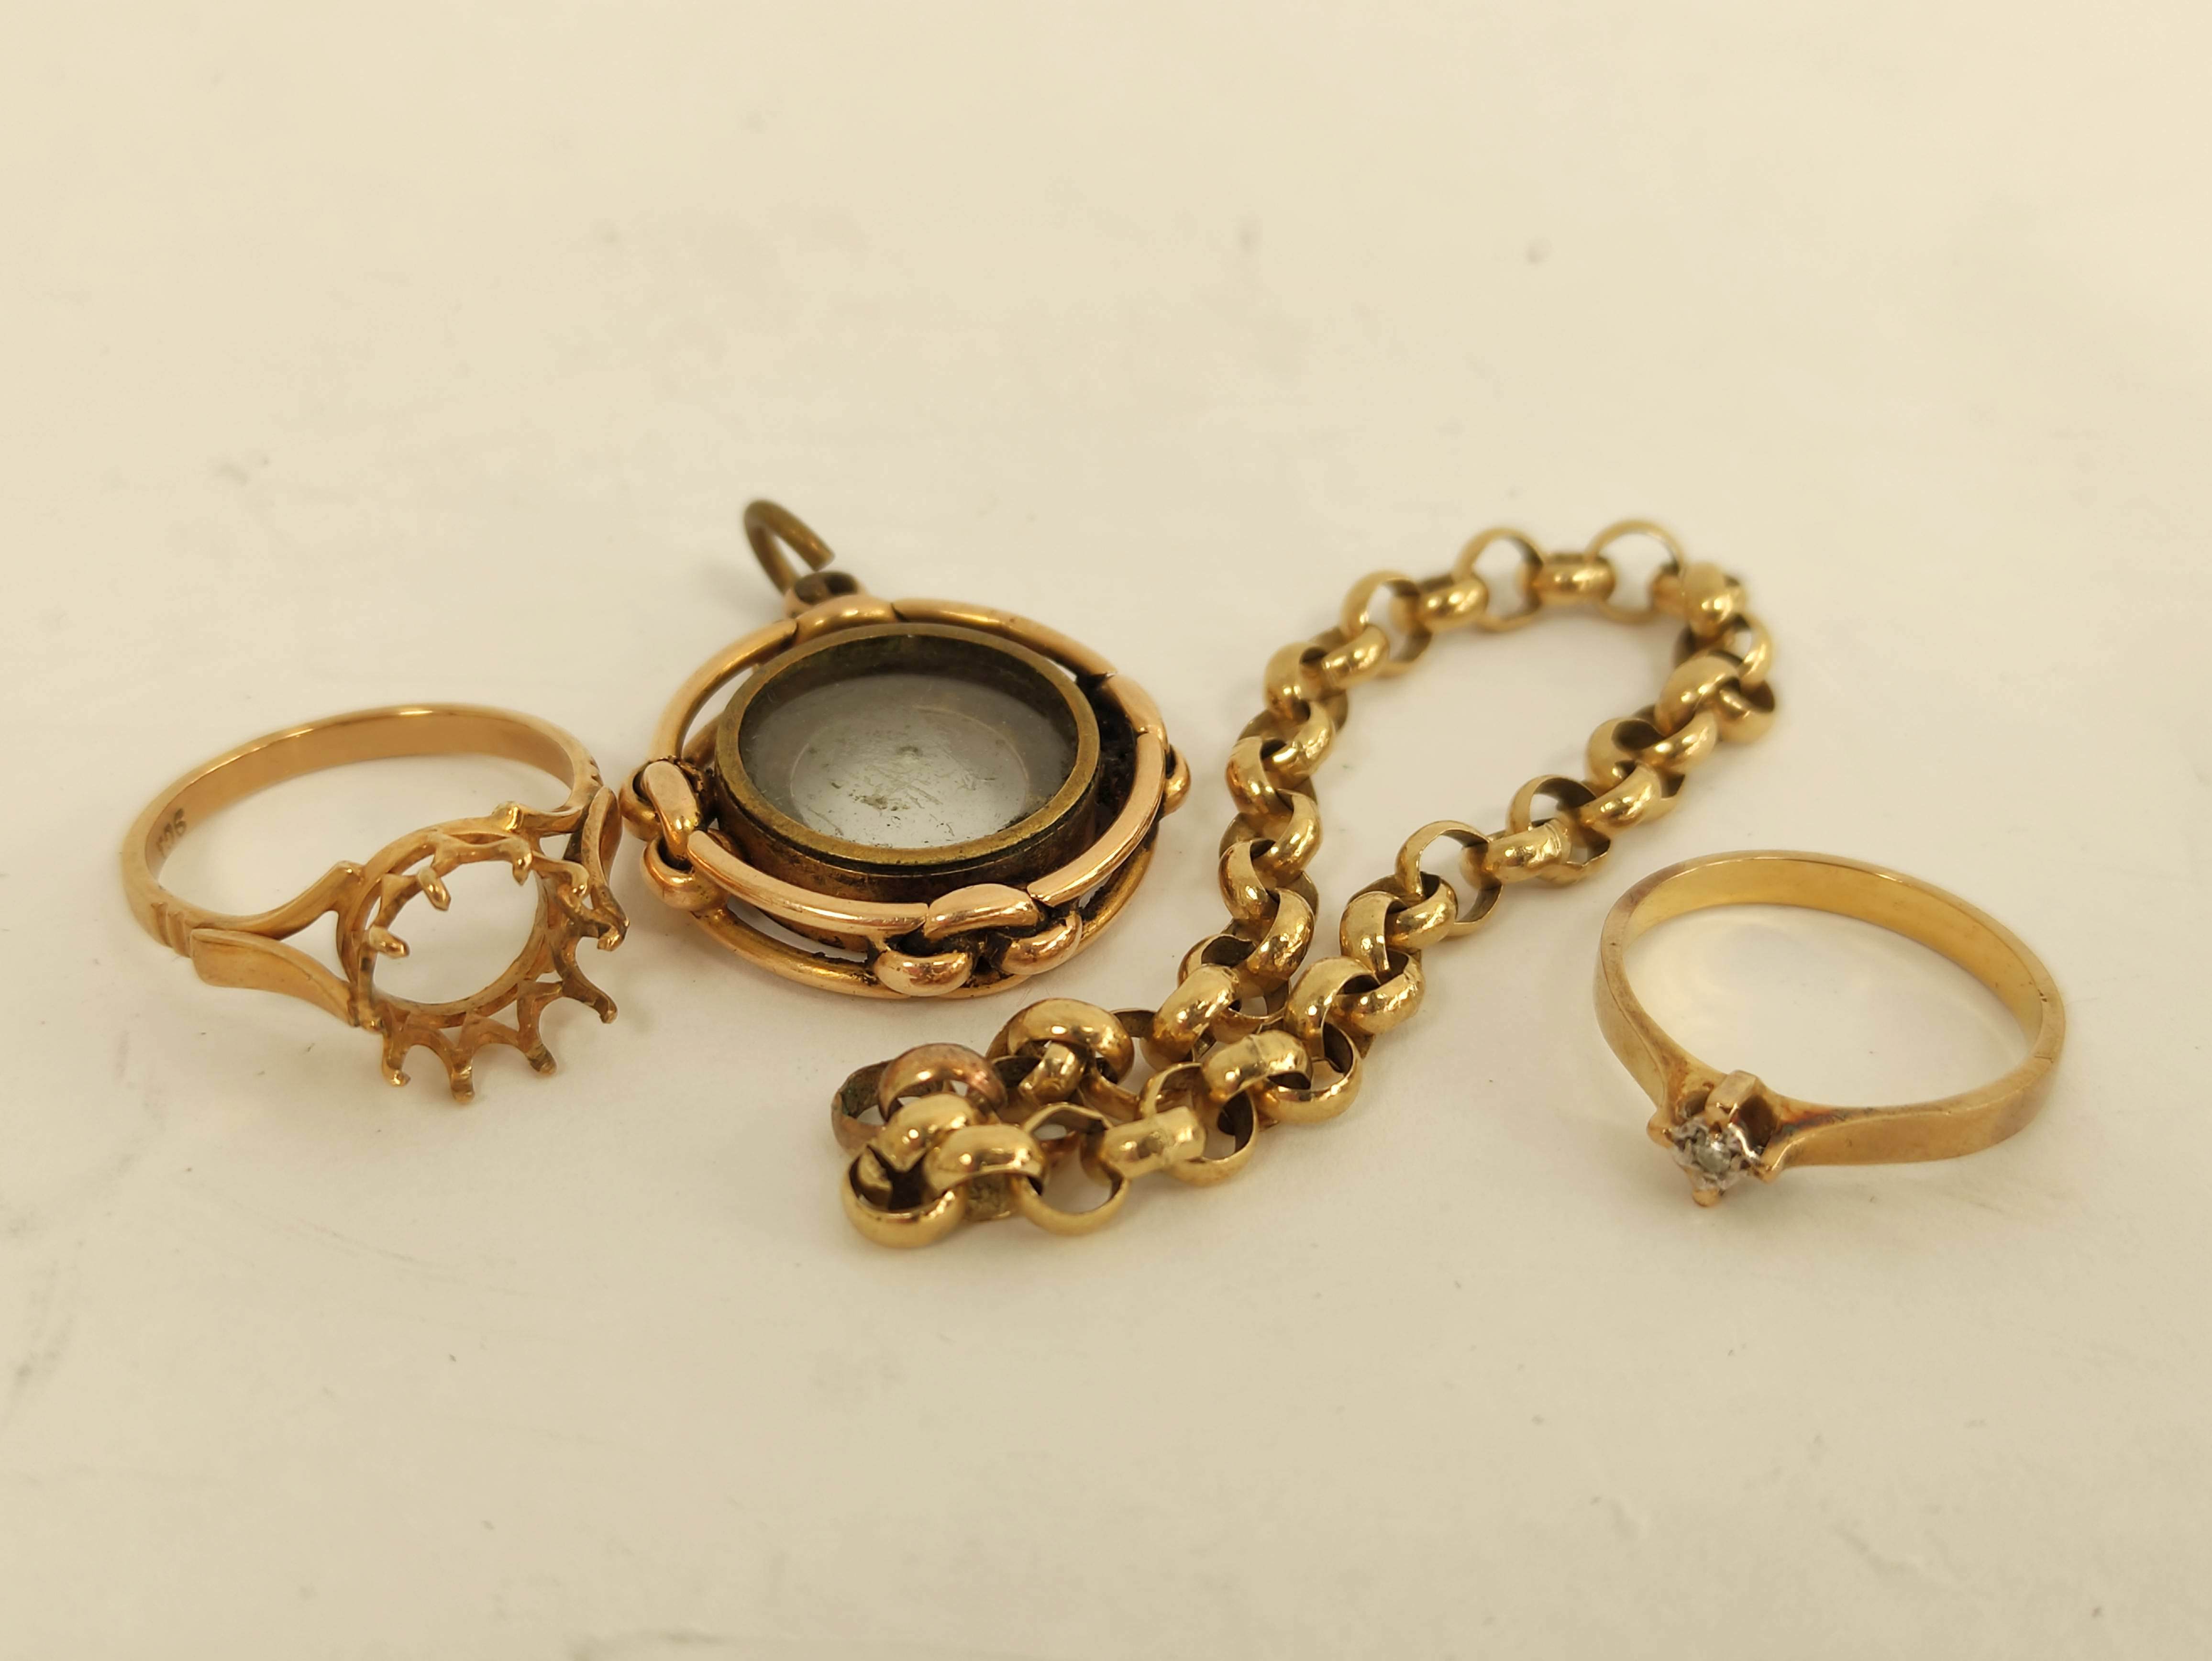 15ct gold compass charm, two rings and a piece of chain. 18g gross. - Image 2 of 6